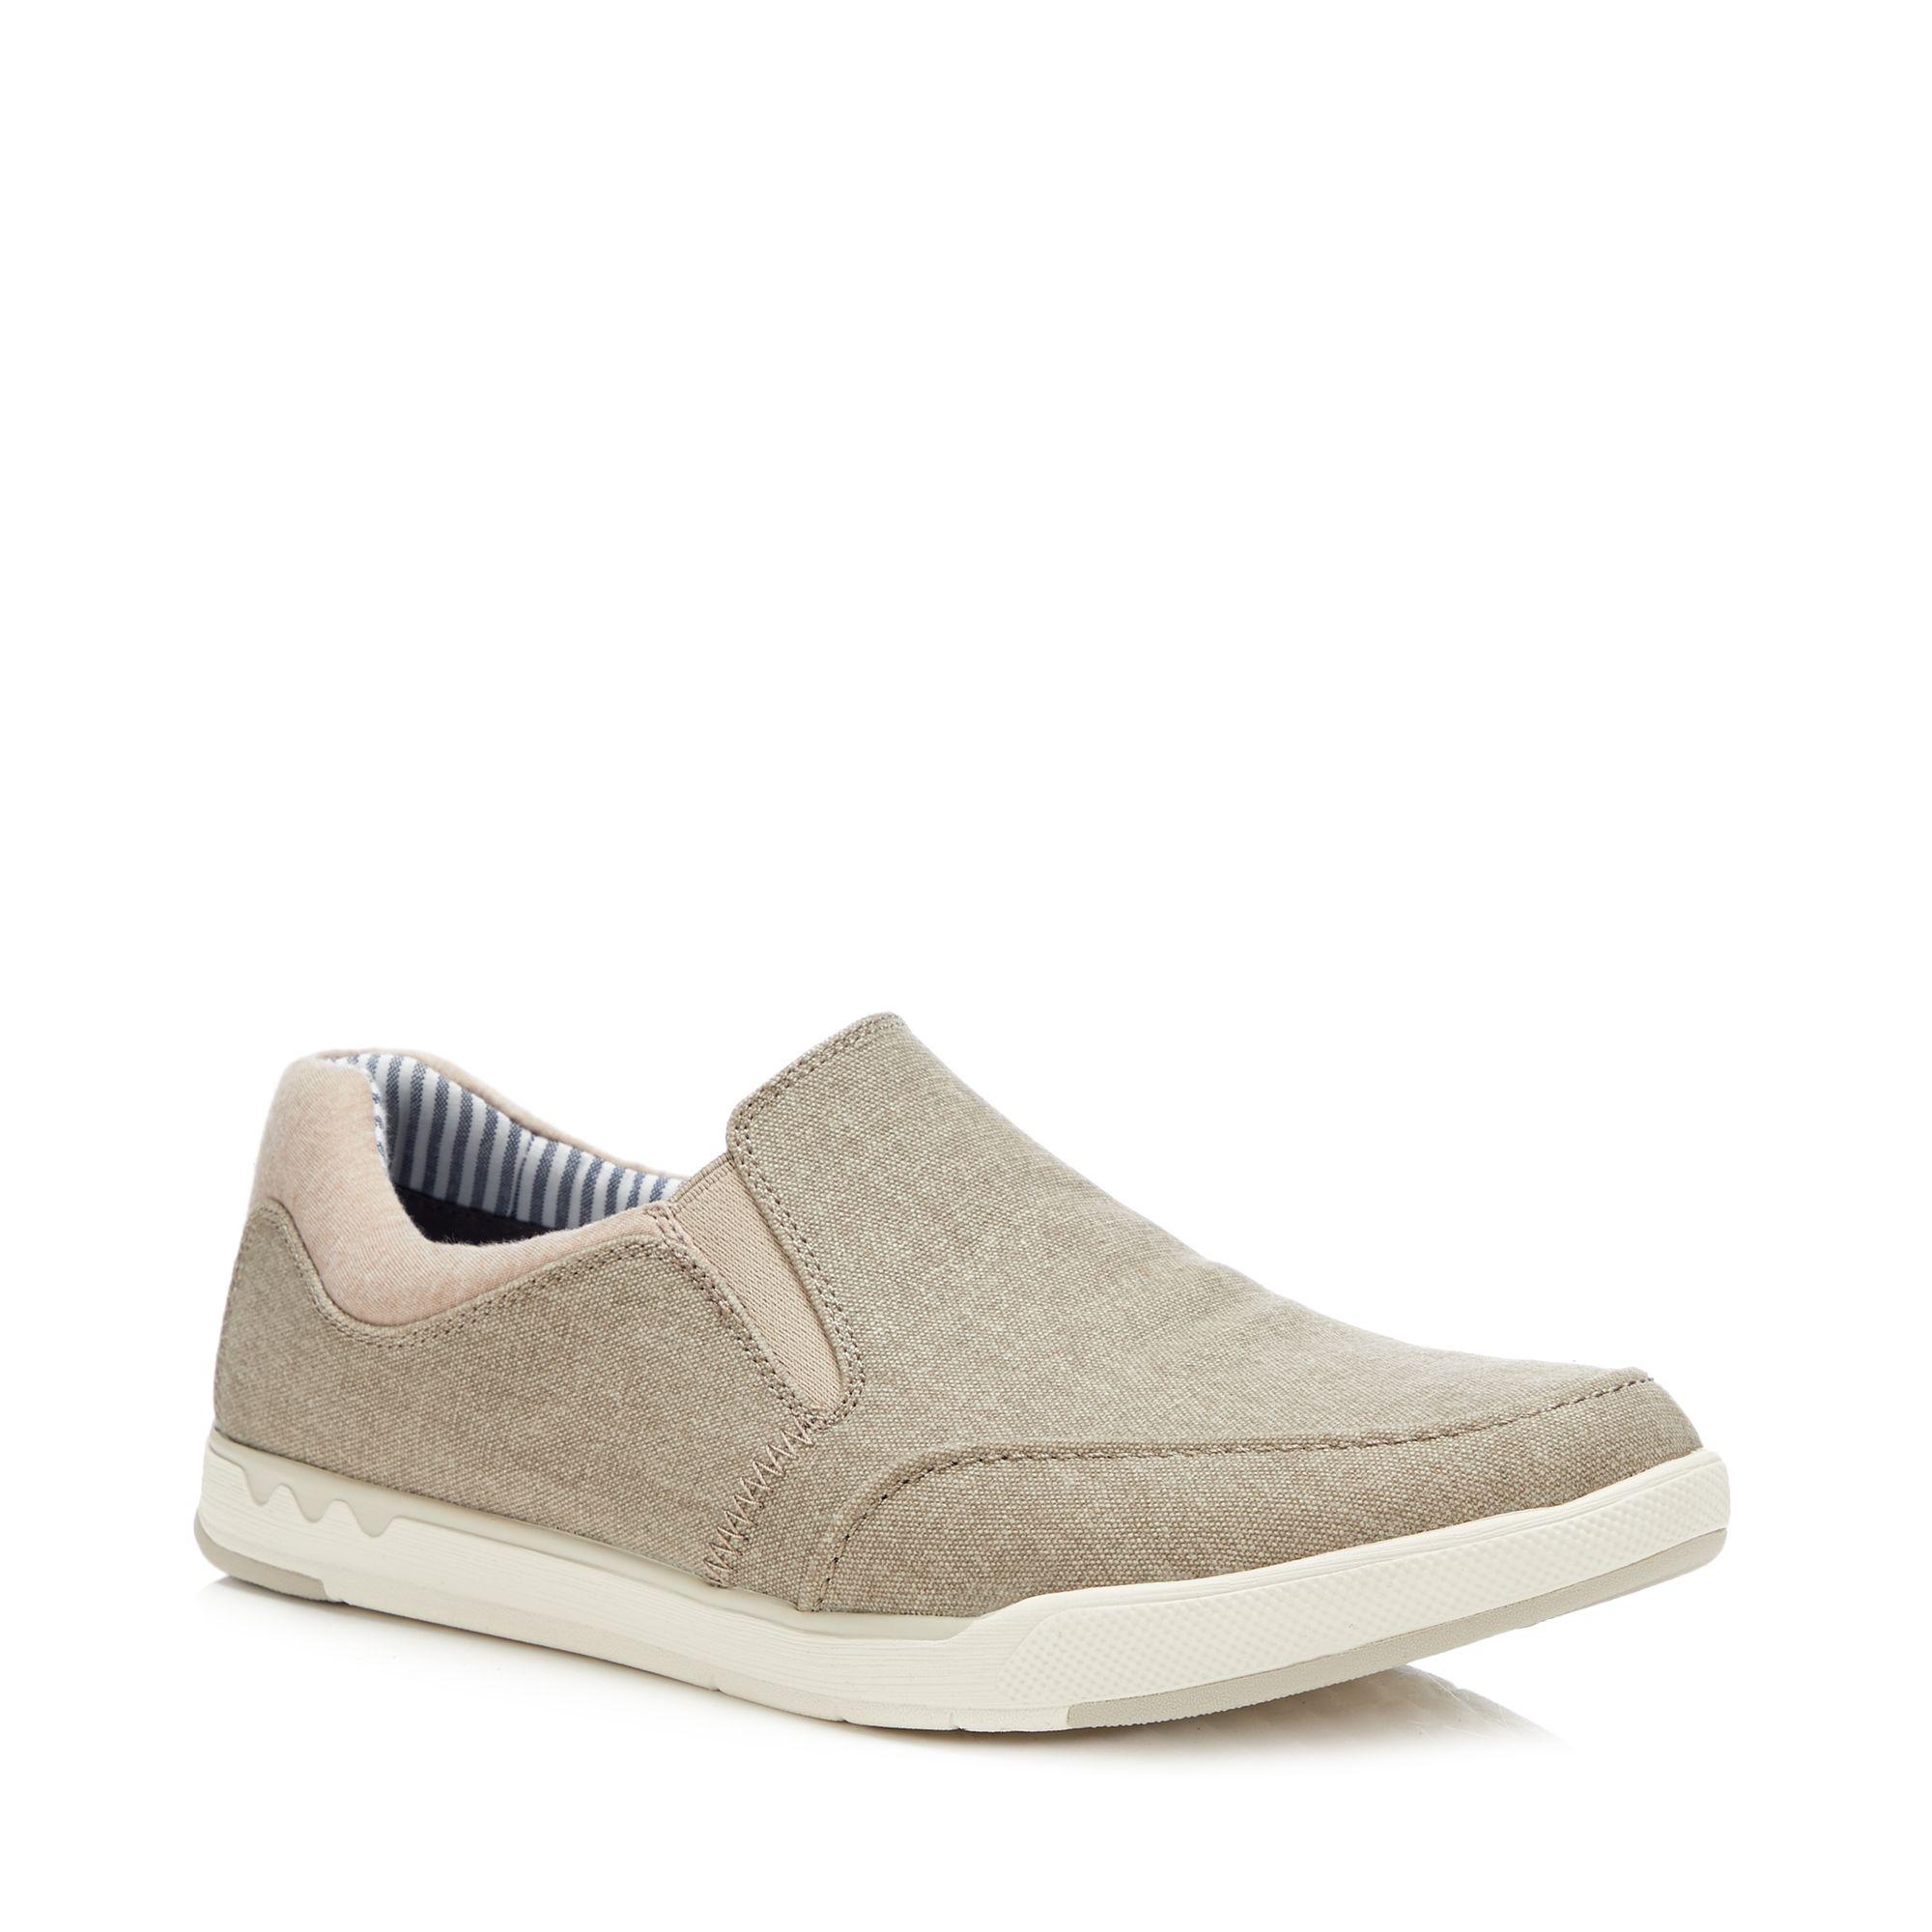 Clarks Men's Canvas 'step Isle' Slip On Shoes in Natural for Men - Lyst